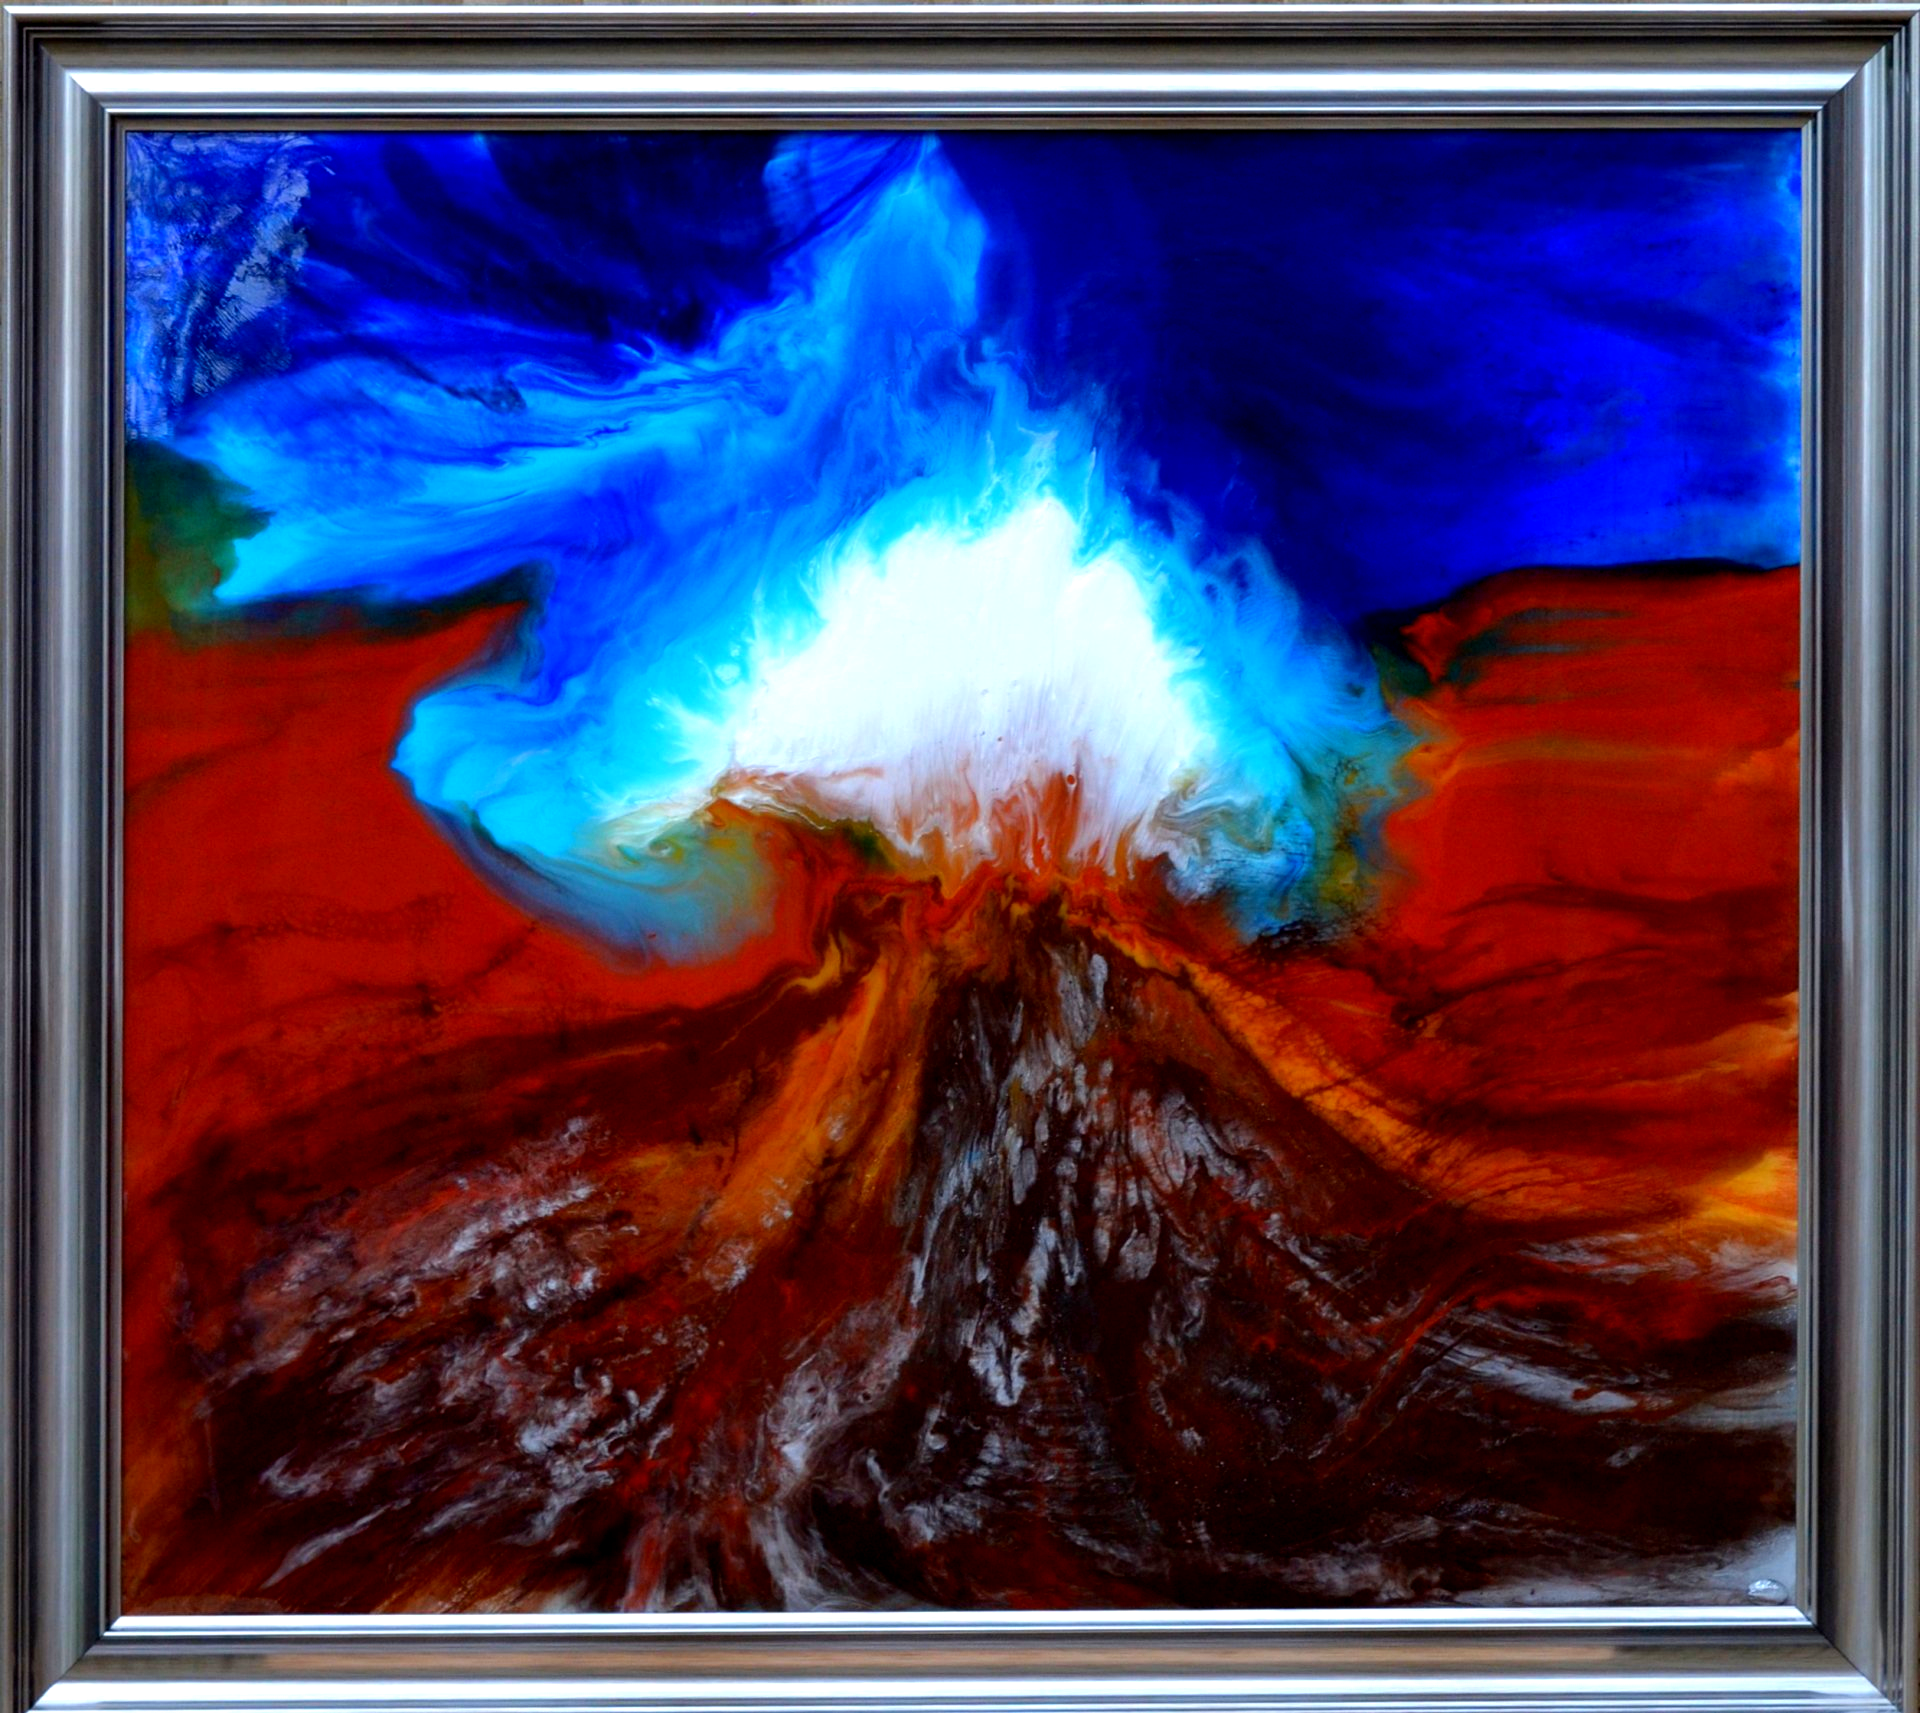 New Beginnings, original large resin painting, abstract style volcano representing new beginnings in all aspect of life